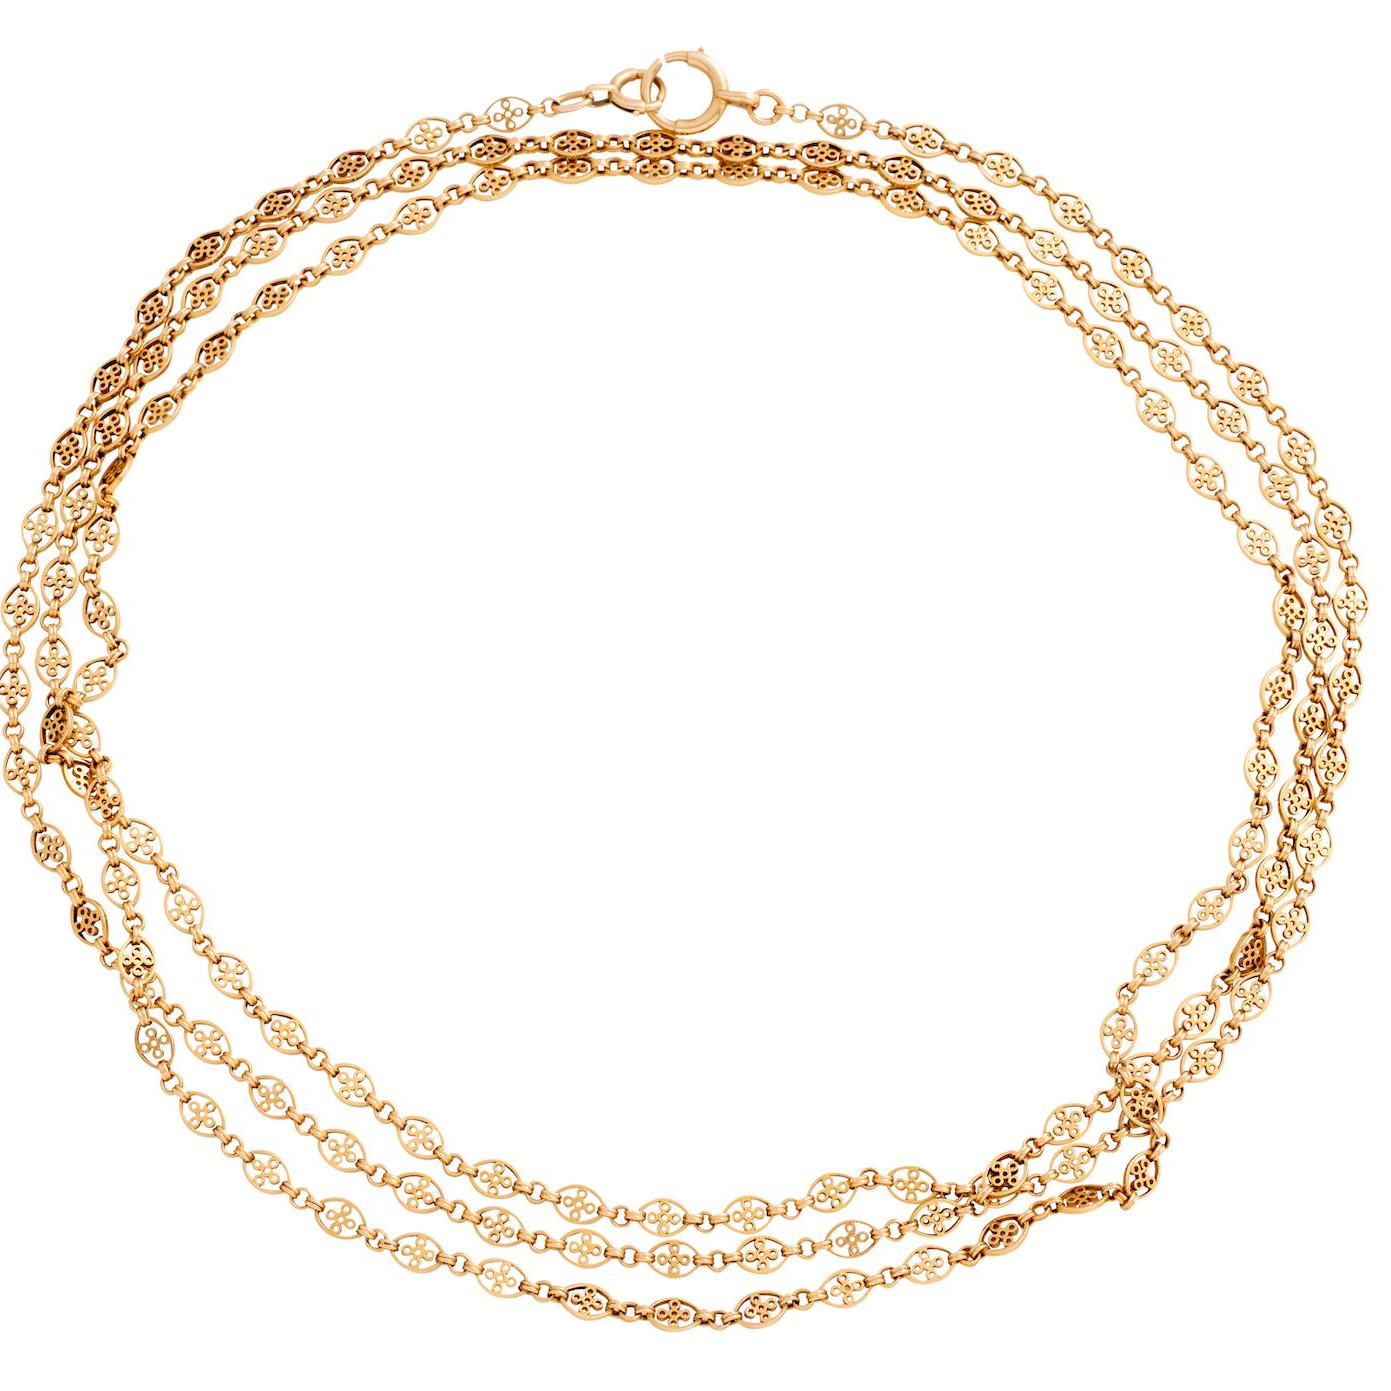 Antique 18KT Yellow Gold Long Chain Necklace top view